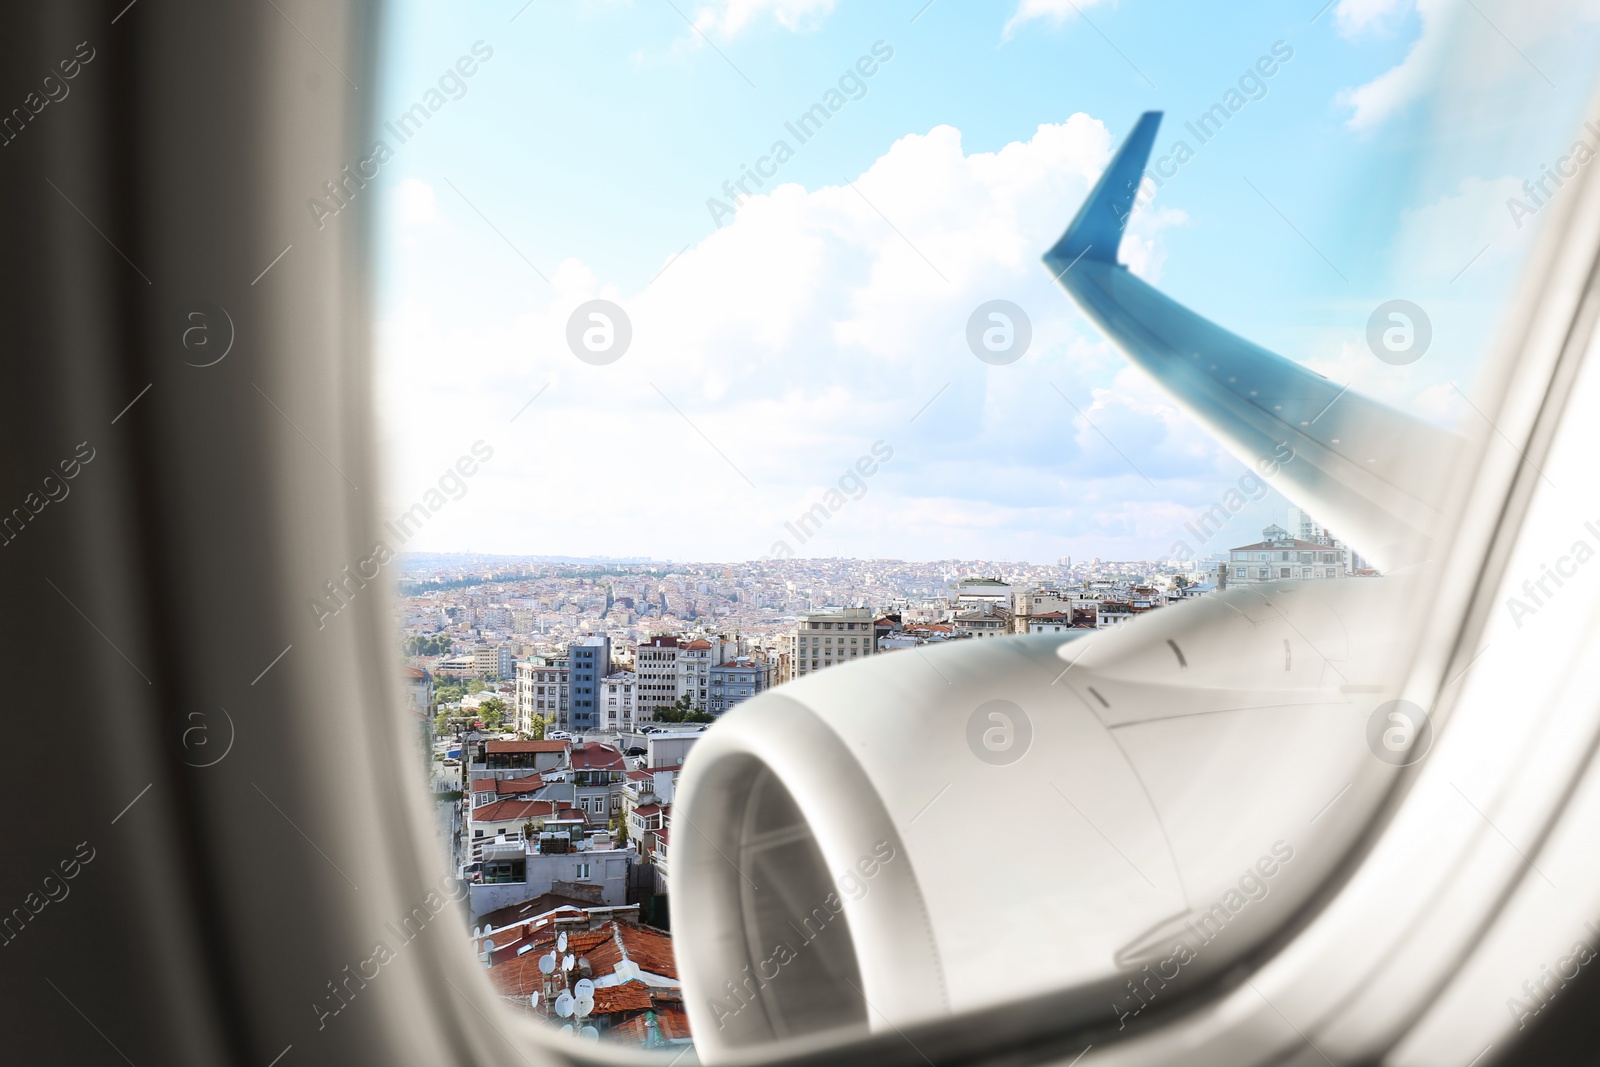 Image of Beautiful view of city with buildings through airplane window during flight